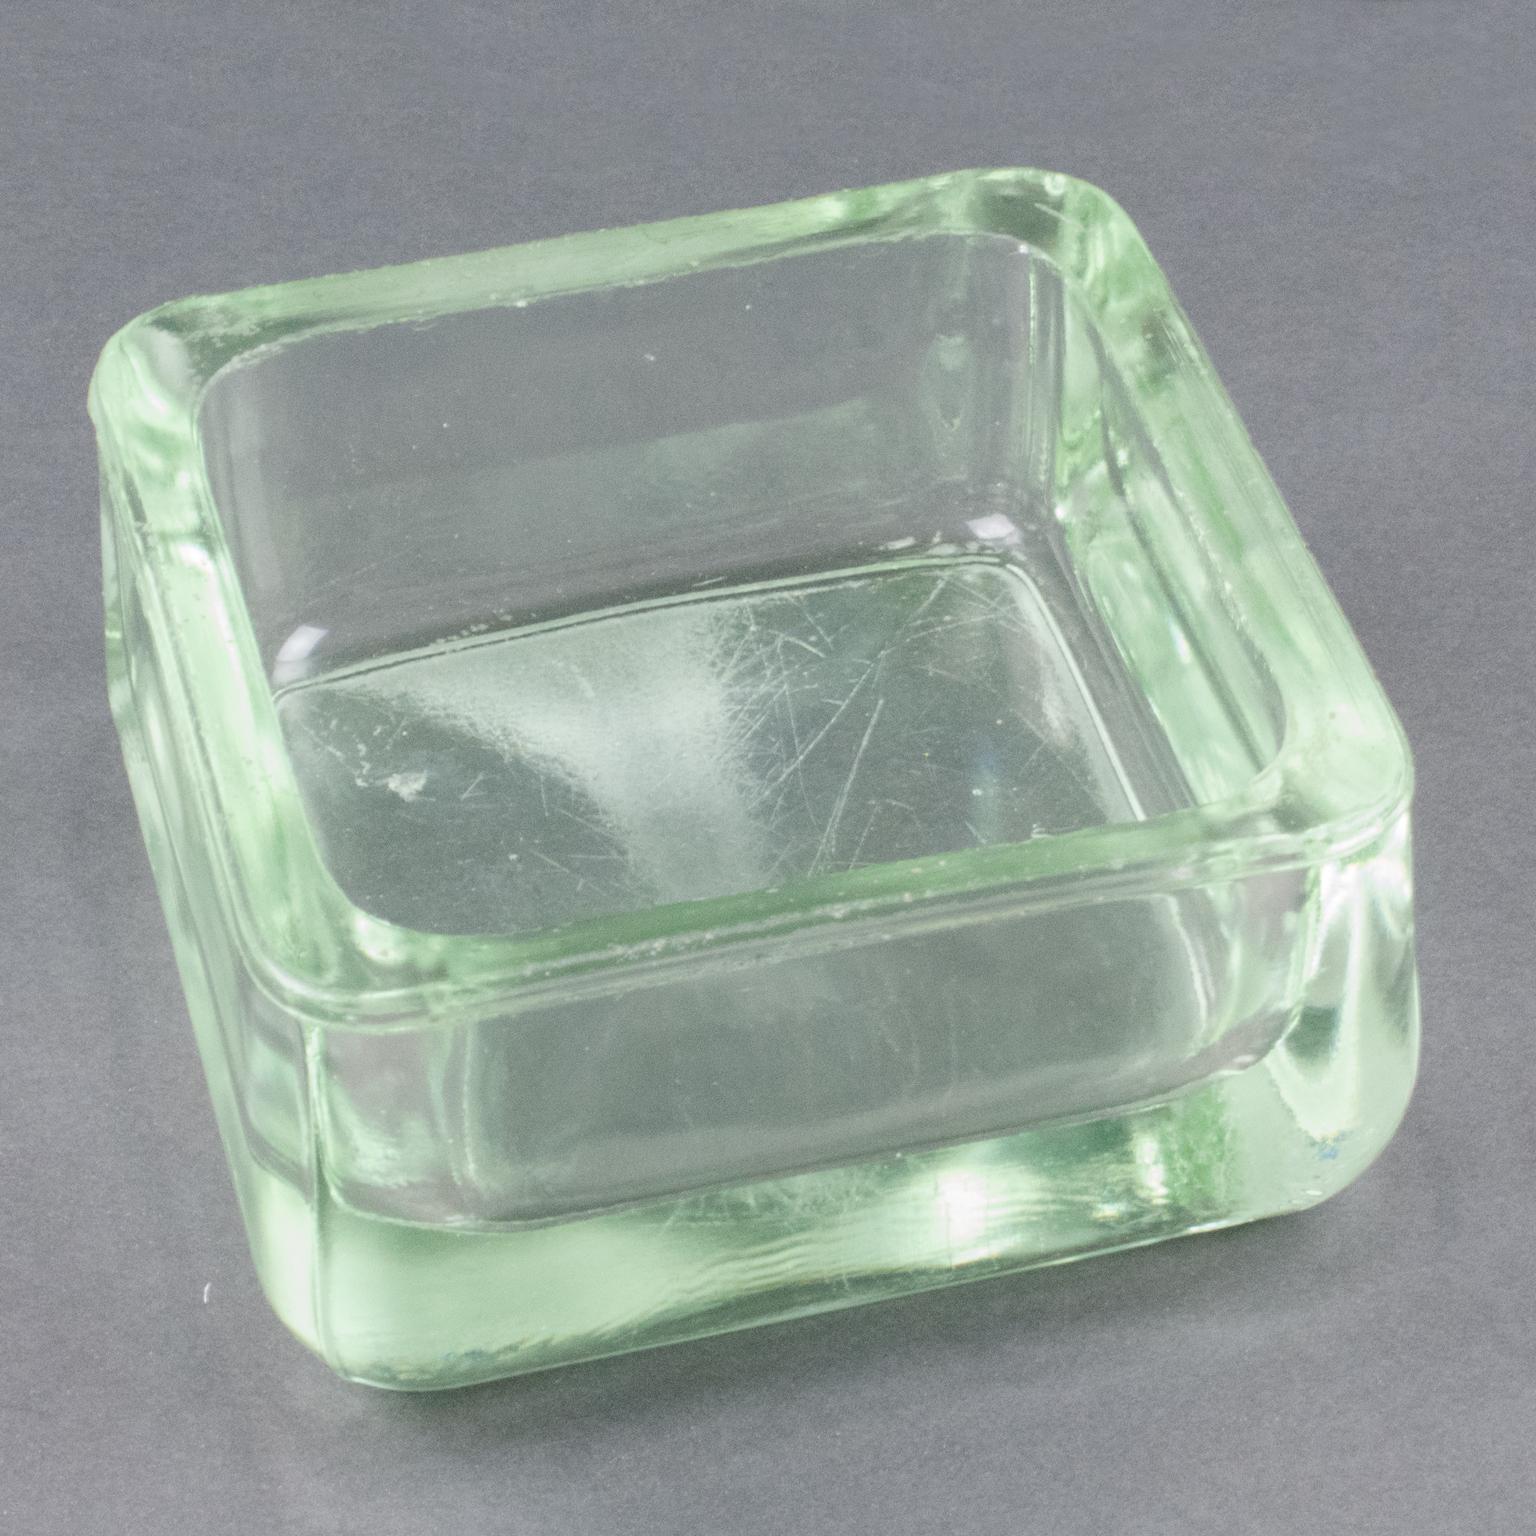 Designed by Le Corbusier for Lumax Molded Glass Desk Accessory Ashtray Catchall 4